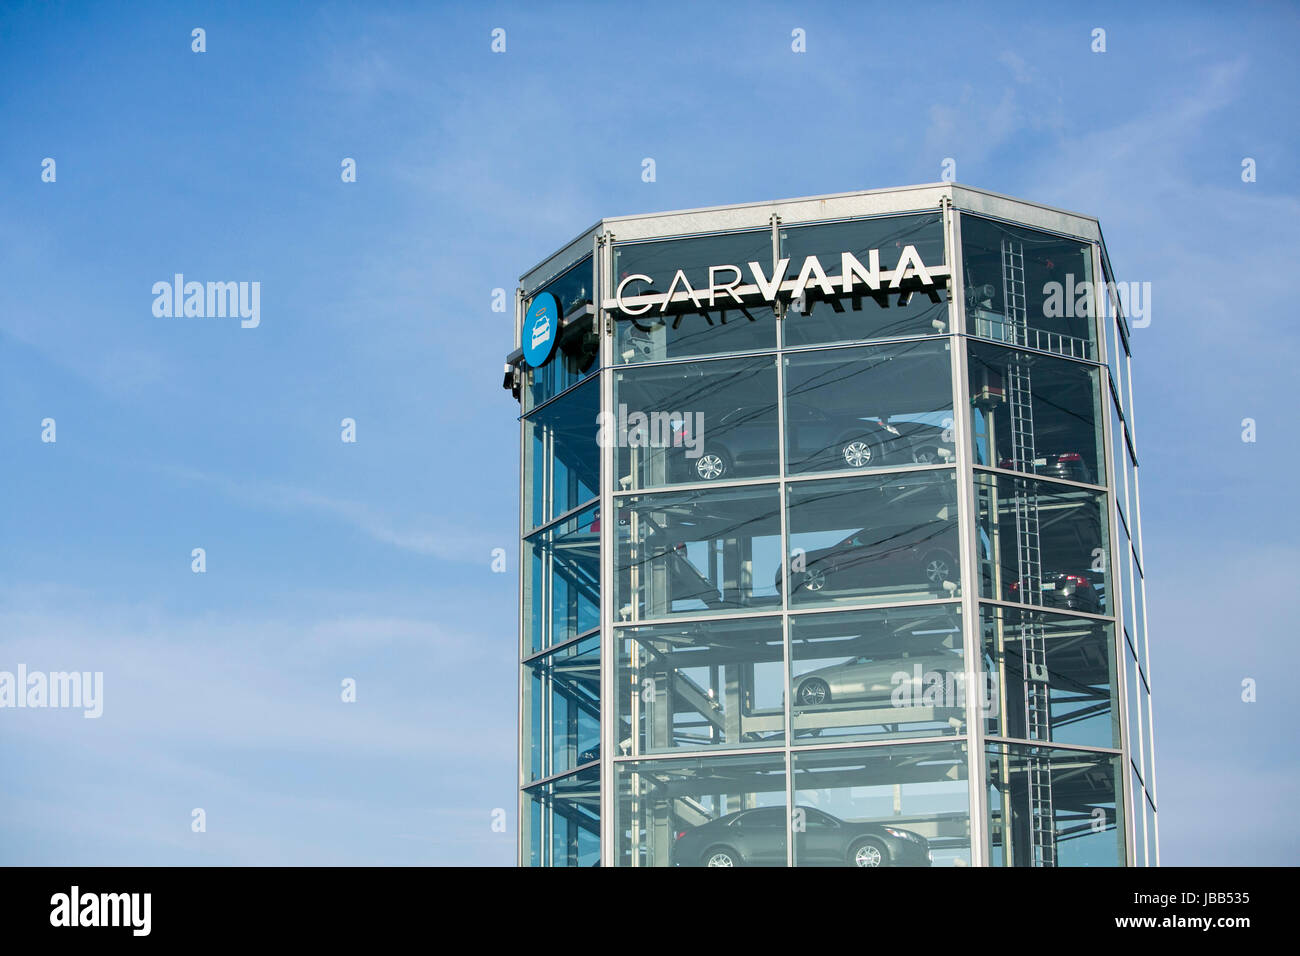 A Carvana car vending machine location in Houston, Texas, on May 27, 2017. Stock Photo